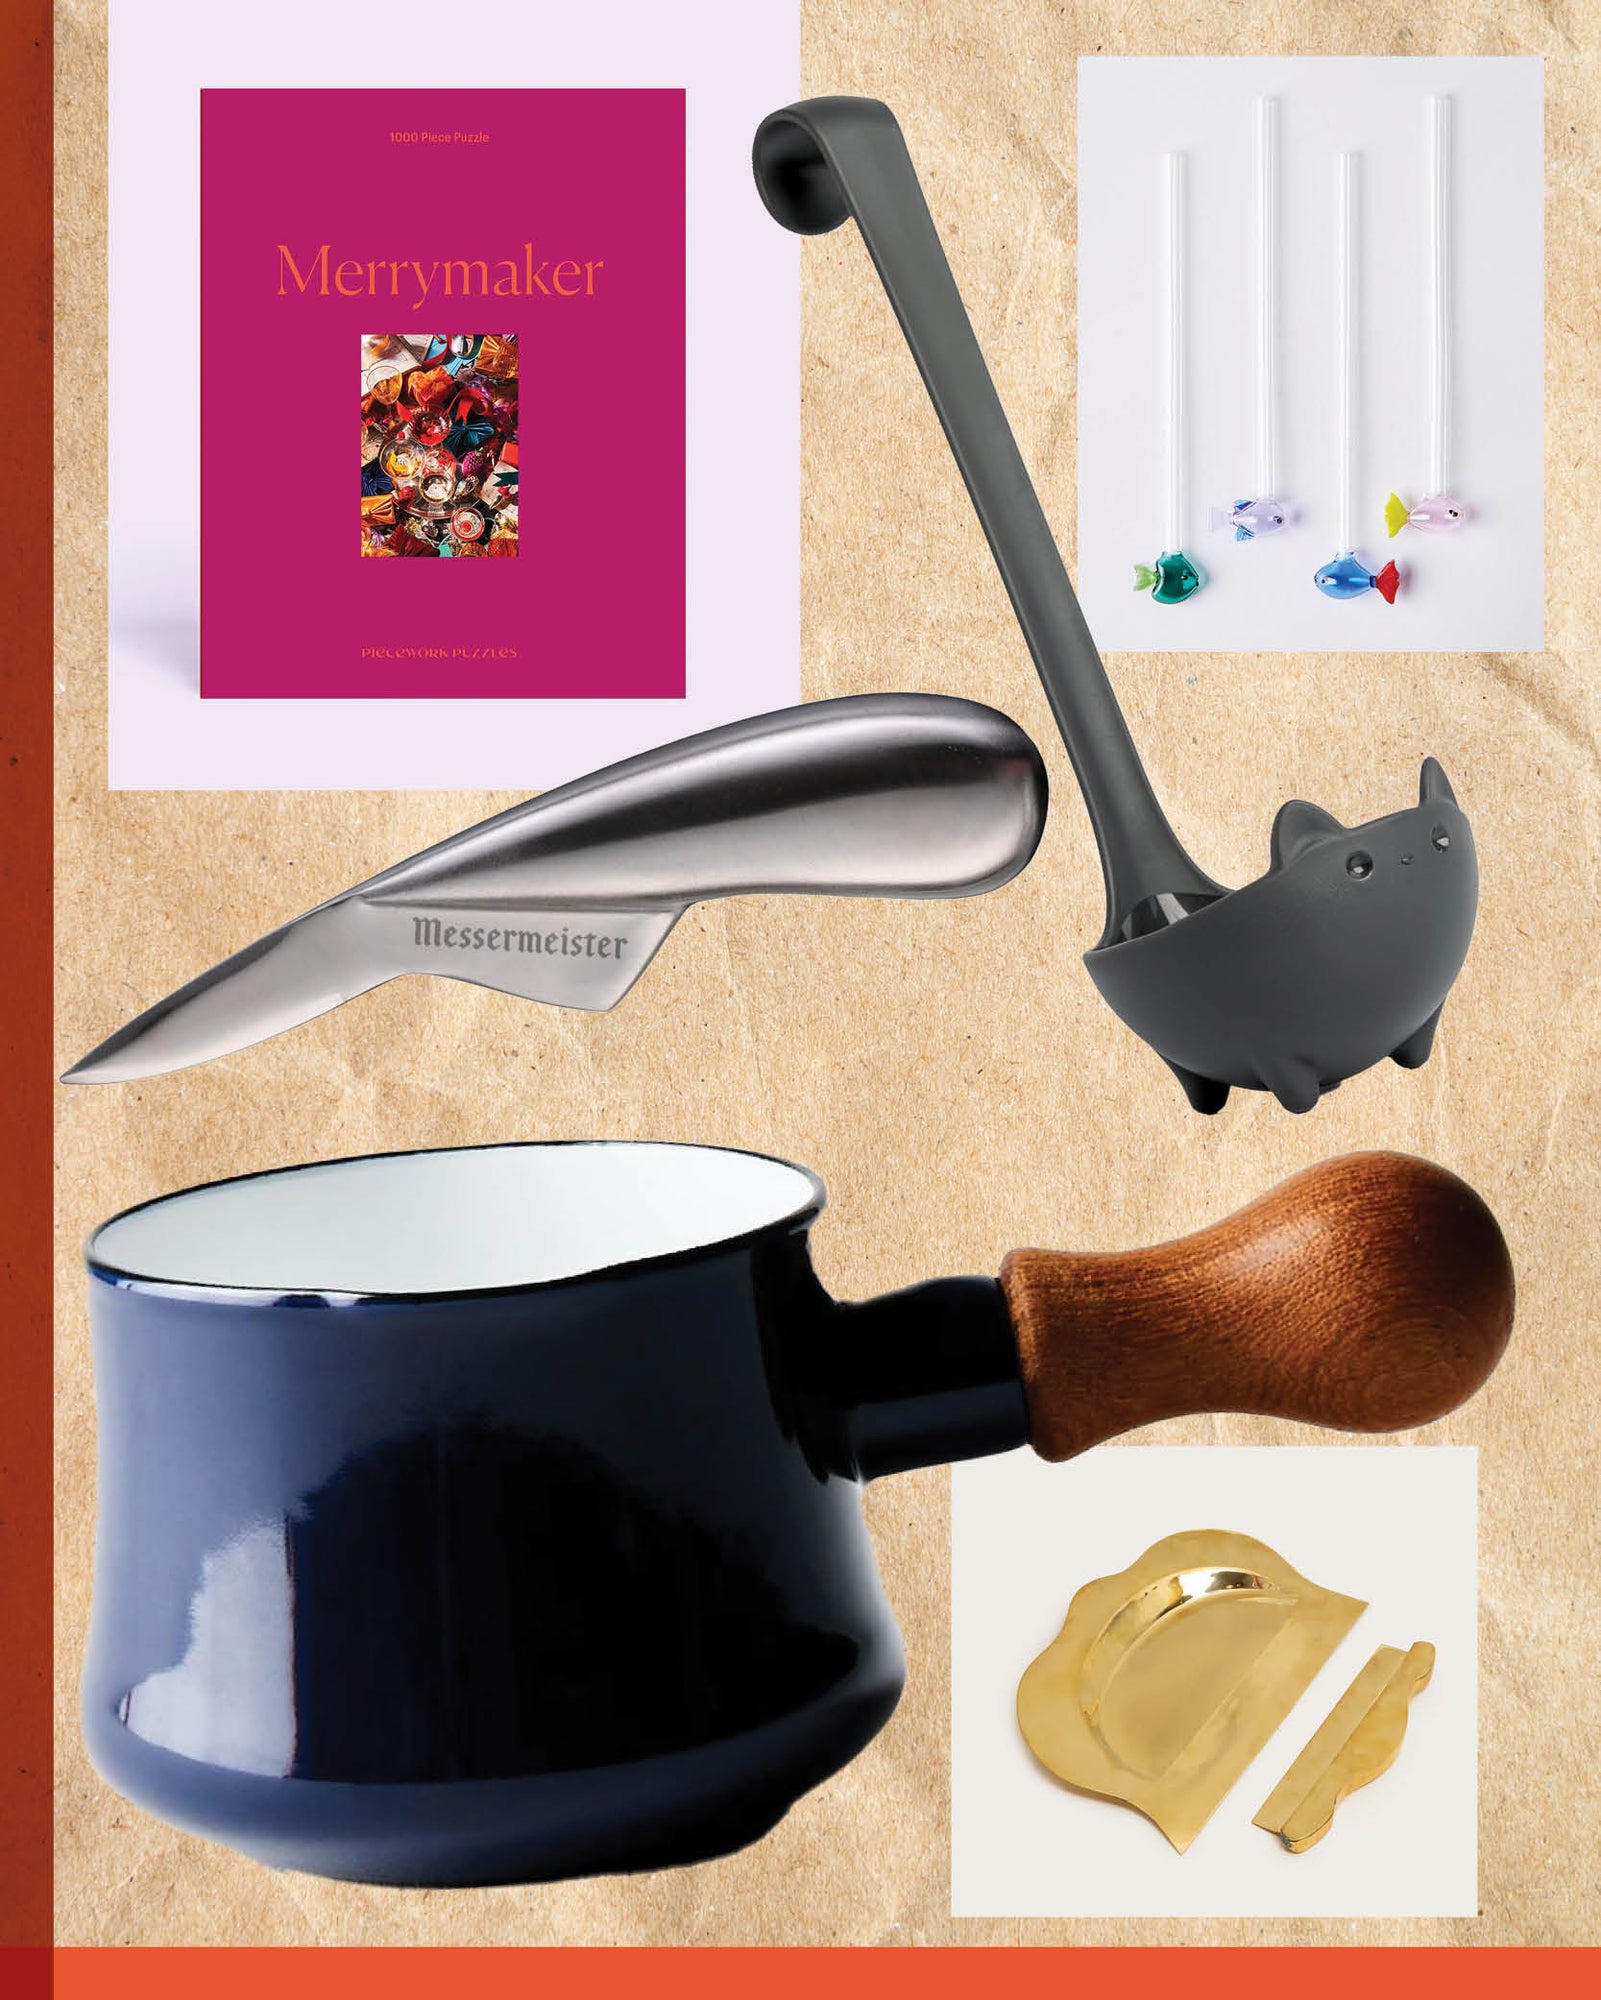 Stocking Stuffers: Tools for the Cooking Life@judyschickens